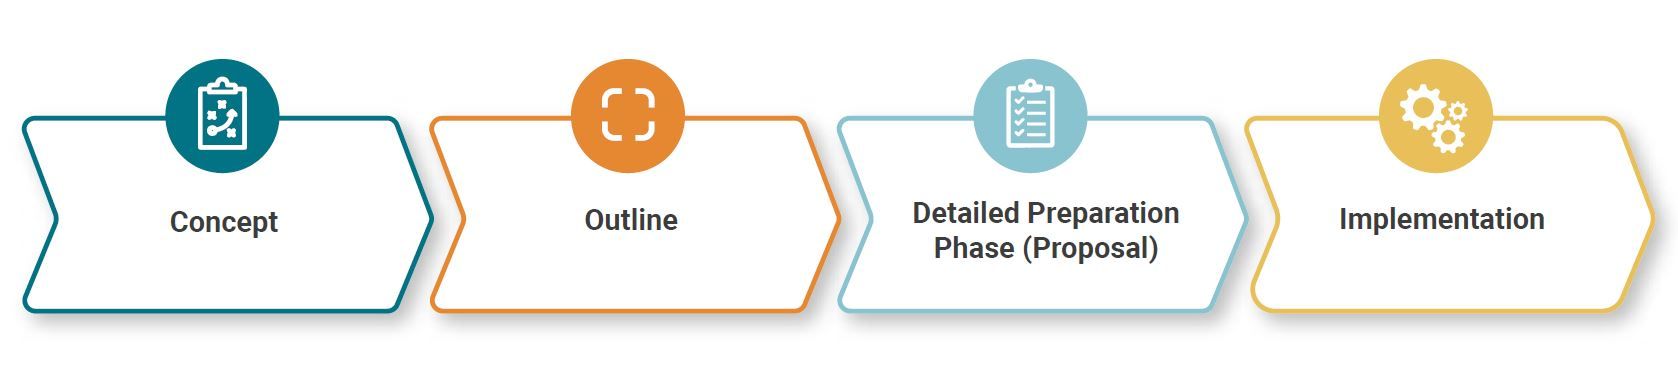 The project cycle consists of 4 phases, including the Project Concept Phase, Outline Phase, Detailed Preparation Phase (DPP) also known as the Proposal Phase and finally, Implementatoin Phase. 